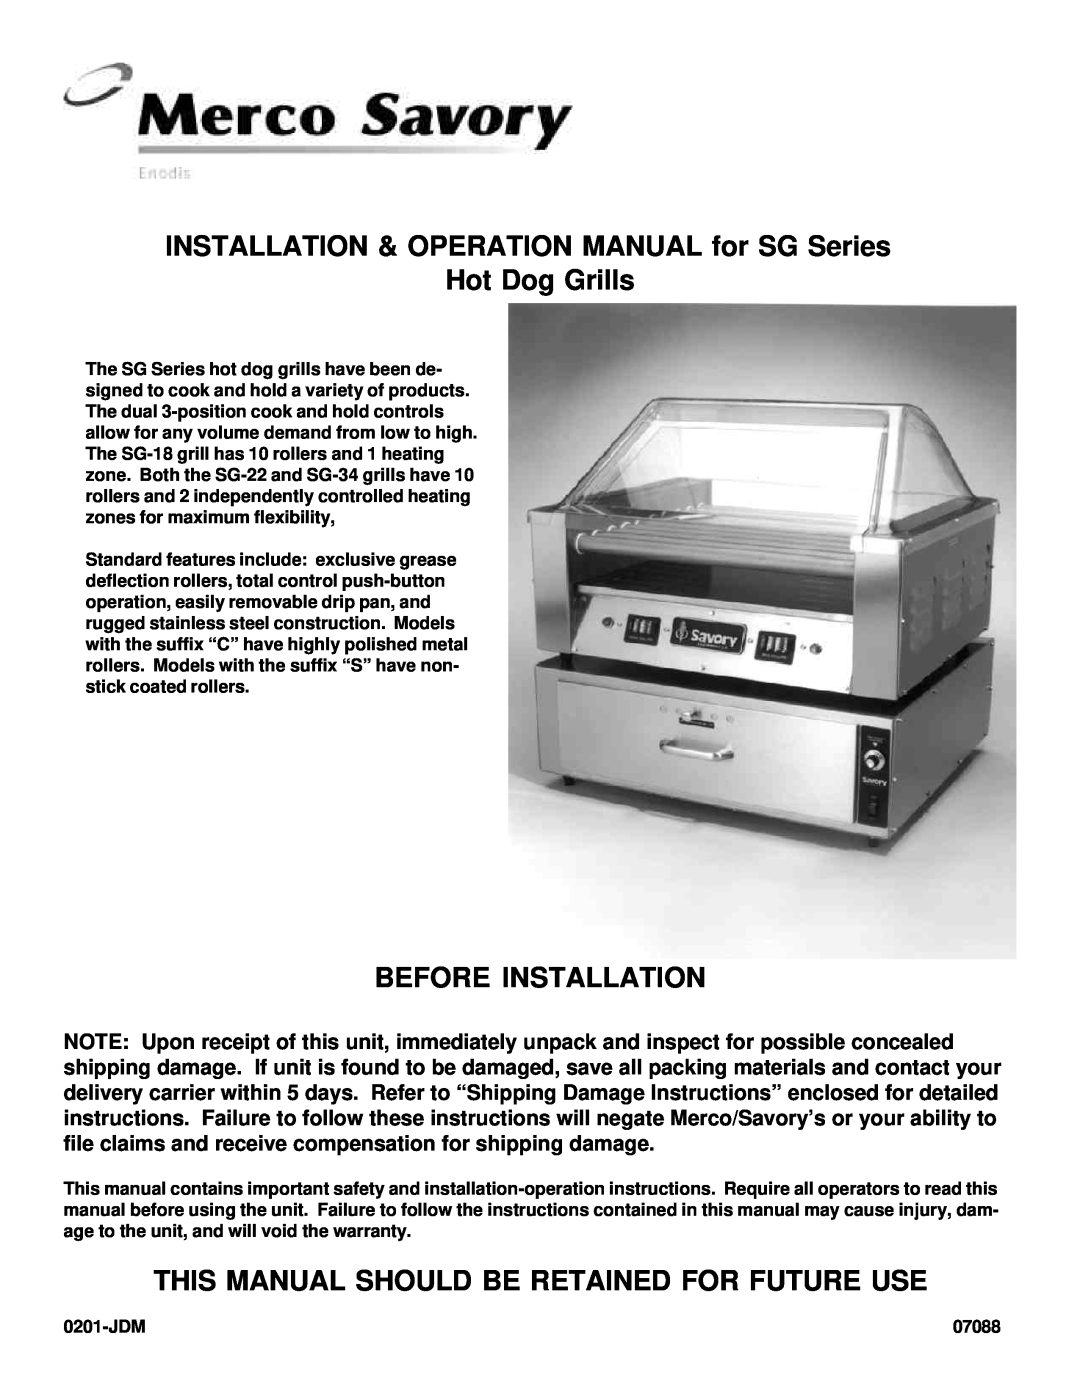 Merco Savory SG Series operation manual Before Installation, This Manual Should Be Retained For Future Use 